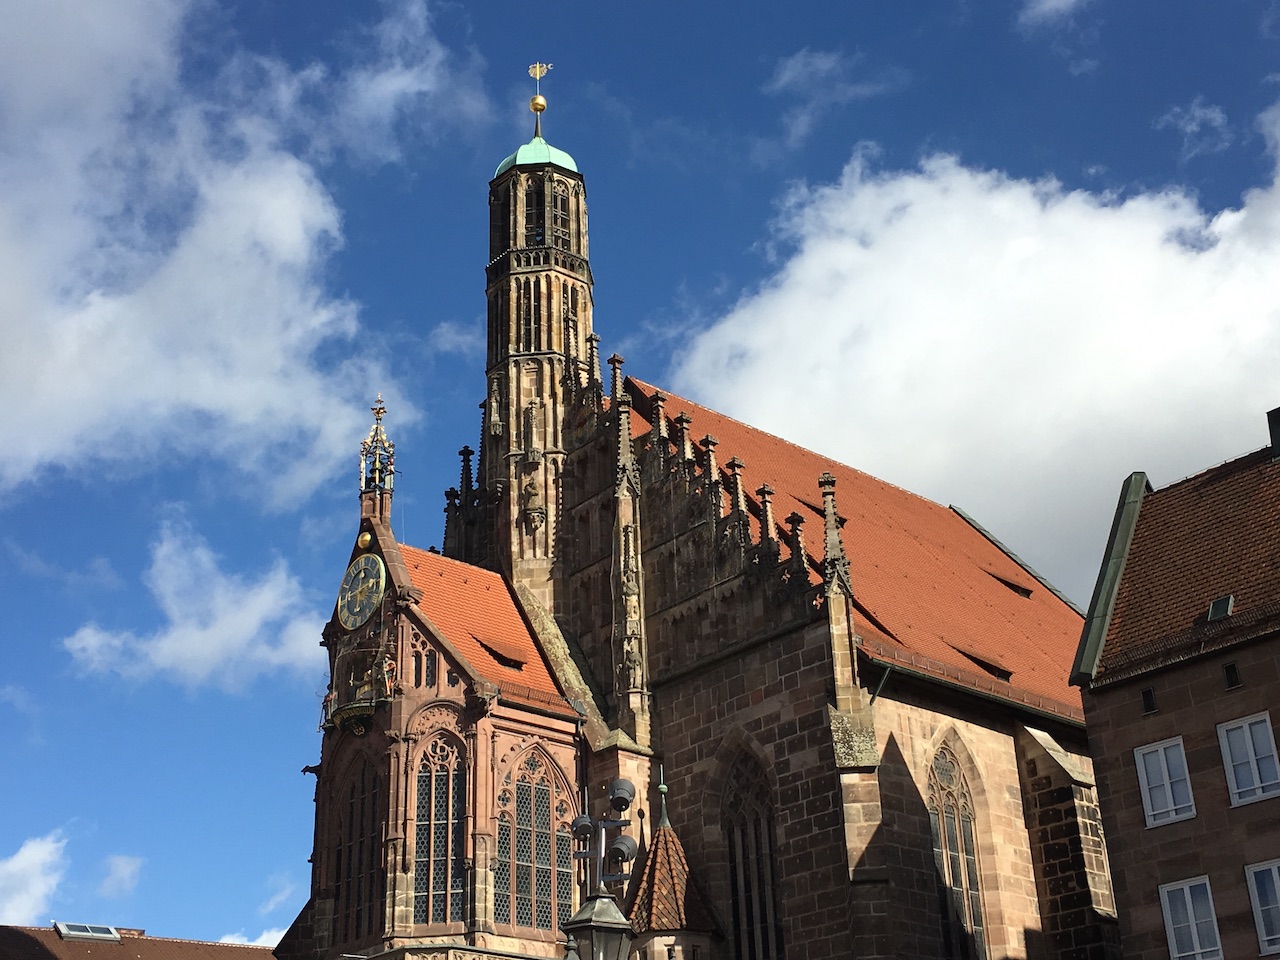 Side view of the church "Church of Our Lady," Nuremberg, Germany